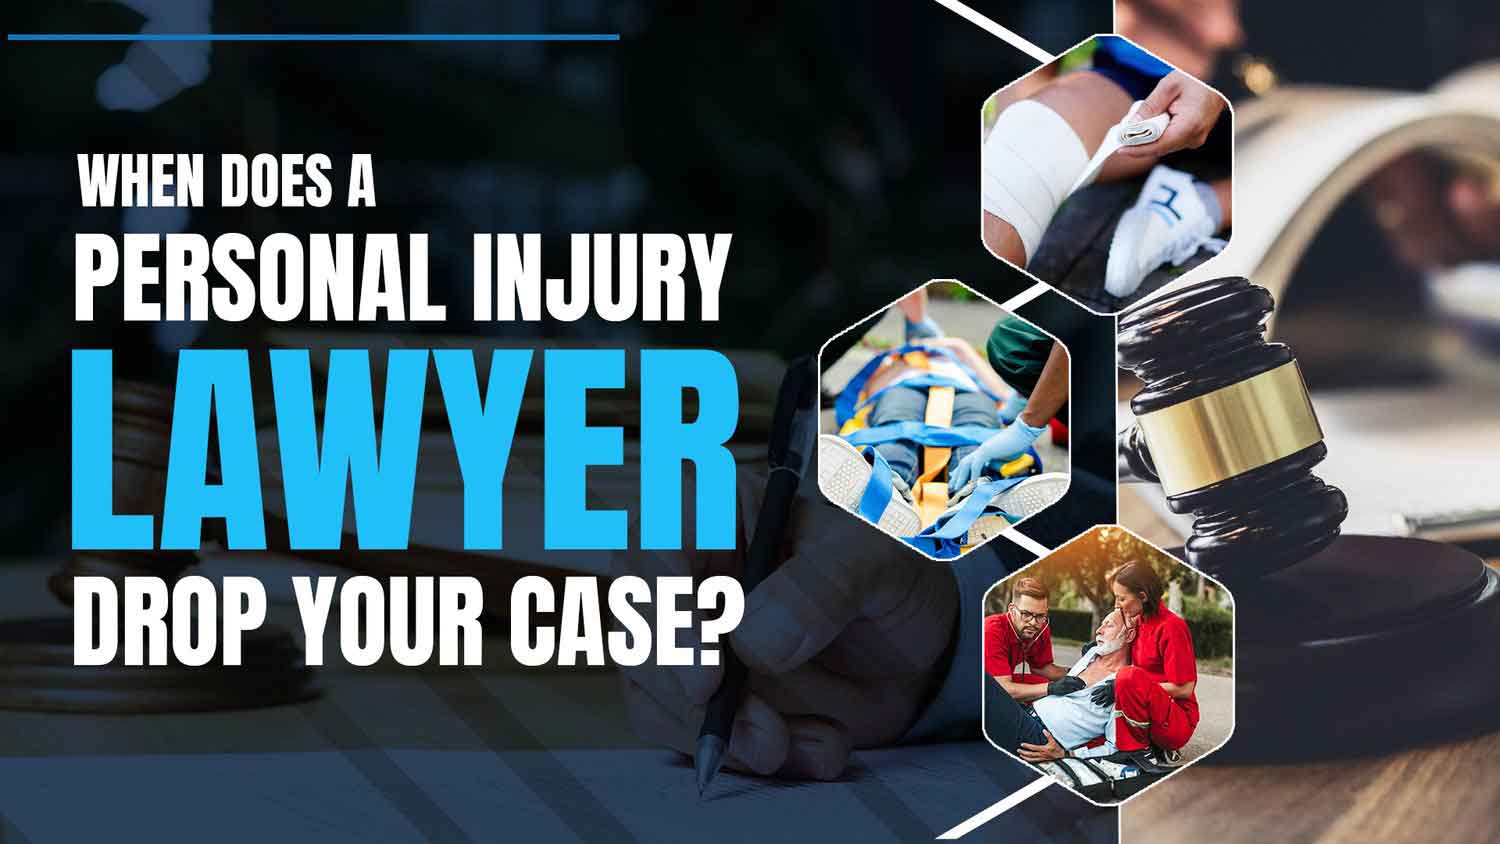 when does personal injury lawyer drop case